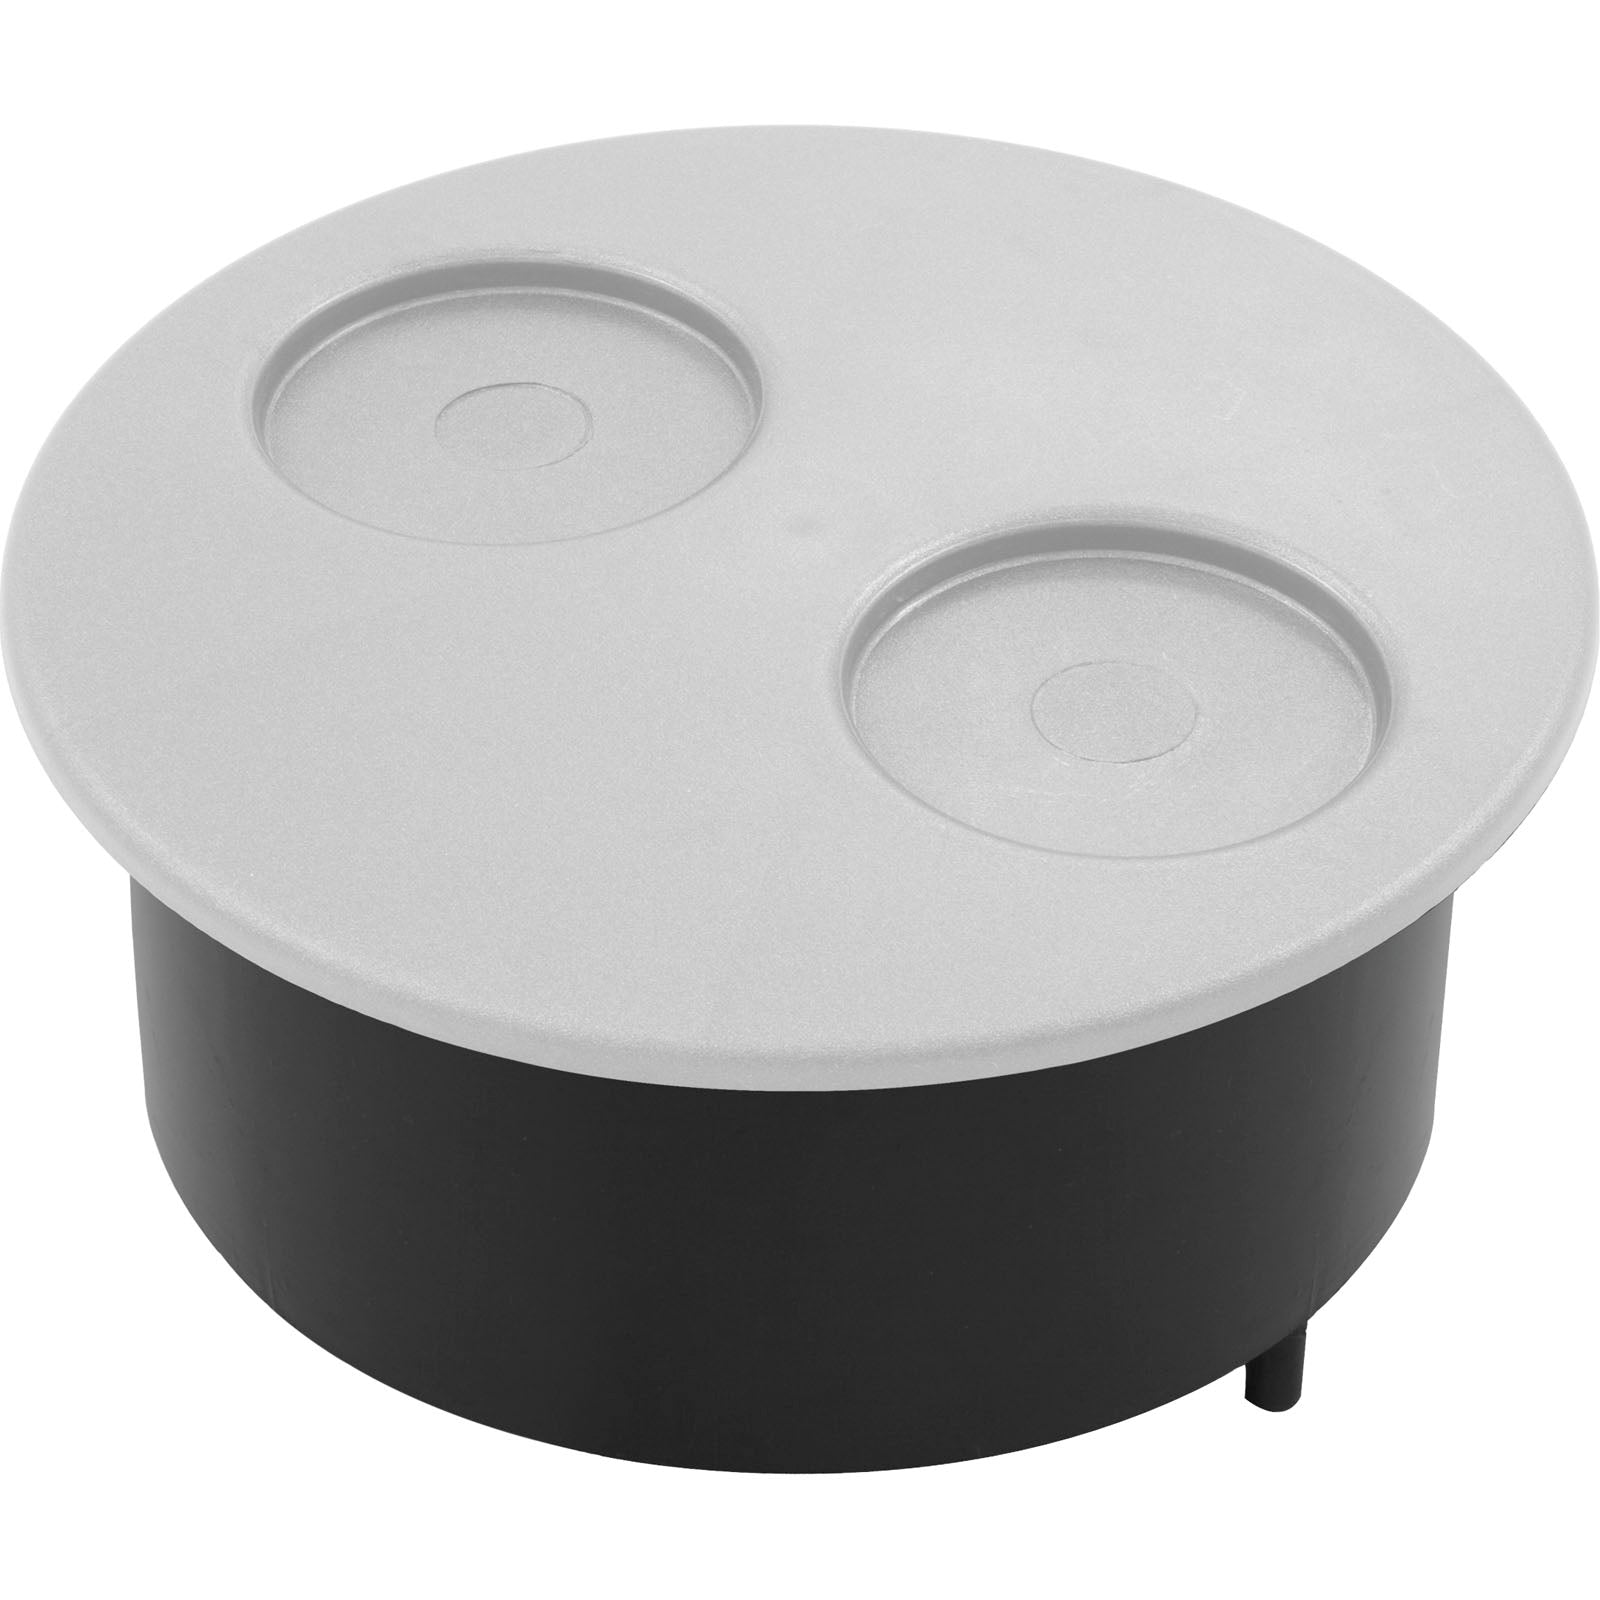 Niche, Waterway Top-Load, with Cup Holder Lid, White/ 500-1020